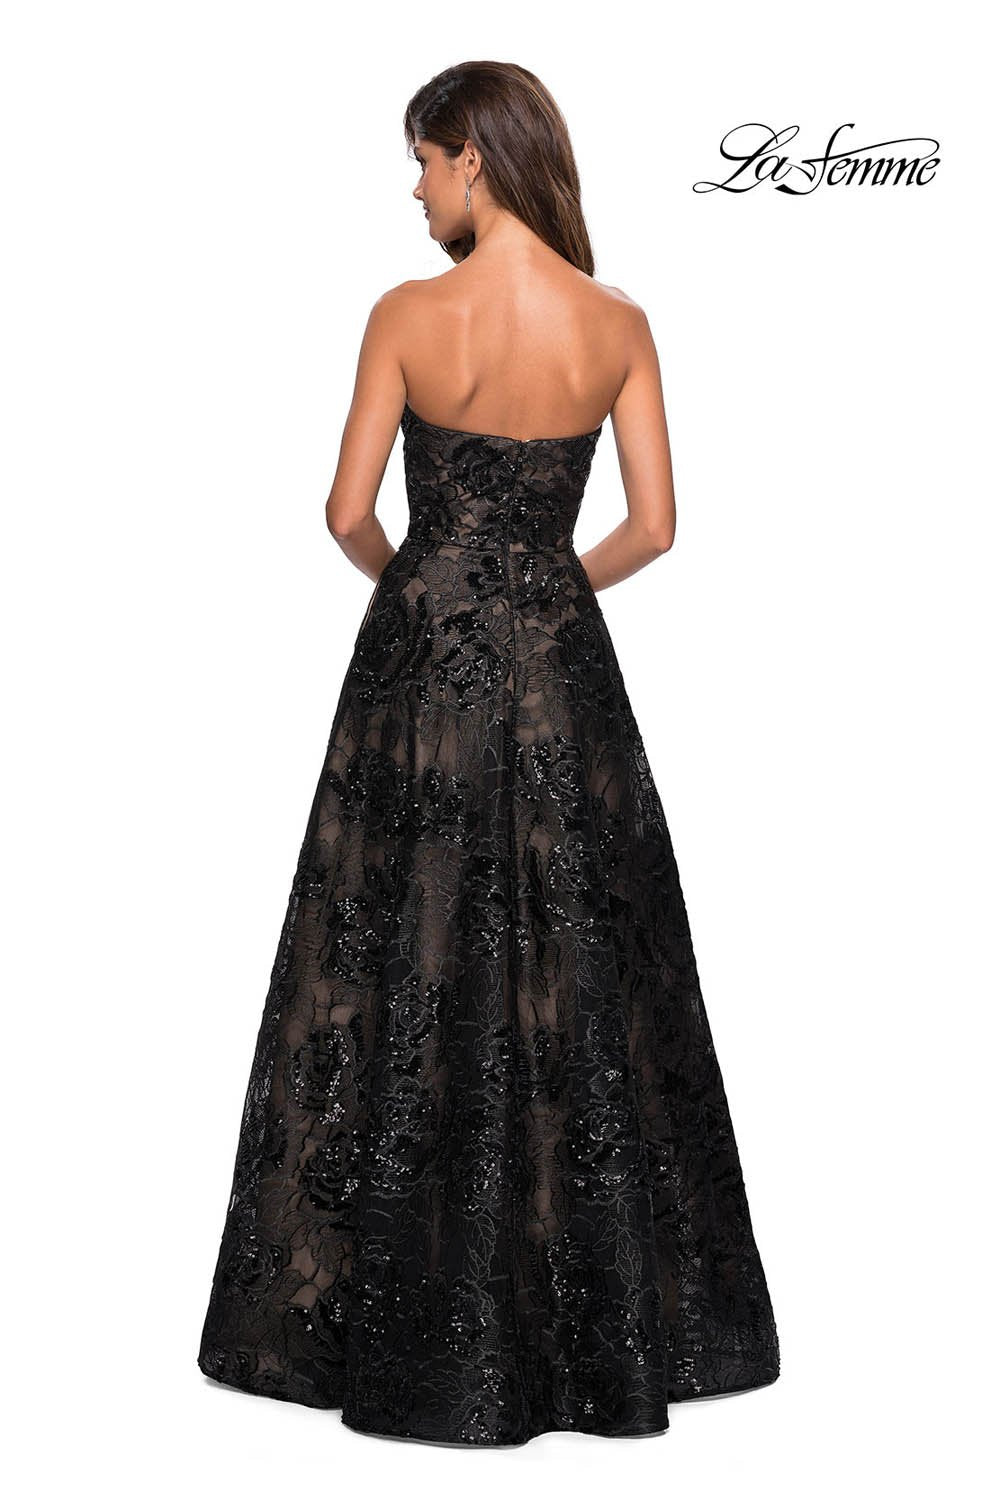 La Femme 27164 dress images in these colors: Black Nude.